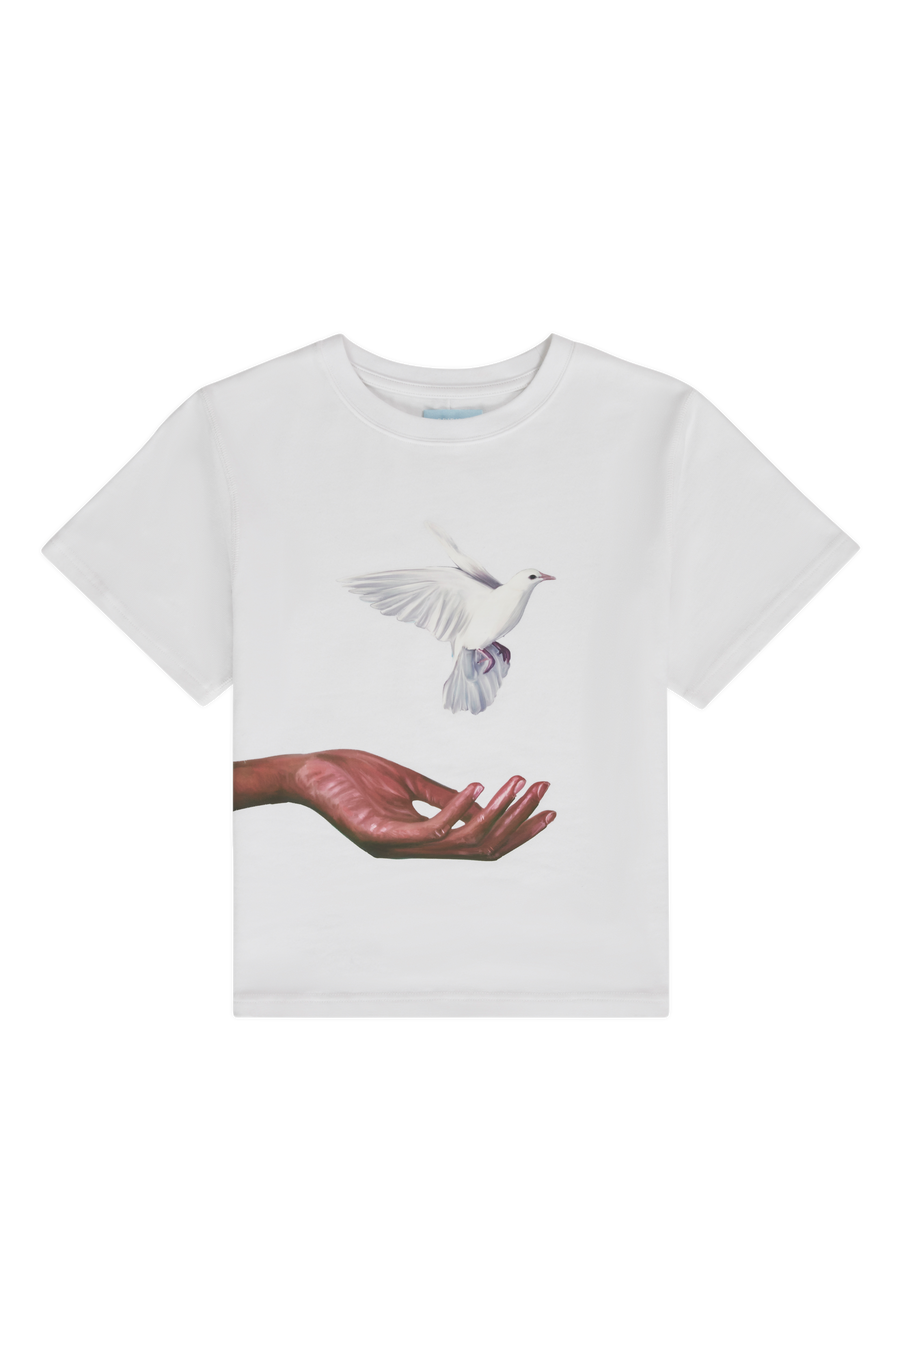 HAND DOVES WHITE CROPPED T-SHIRT